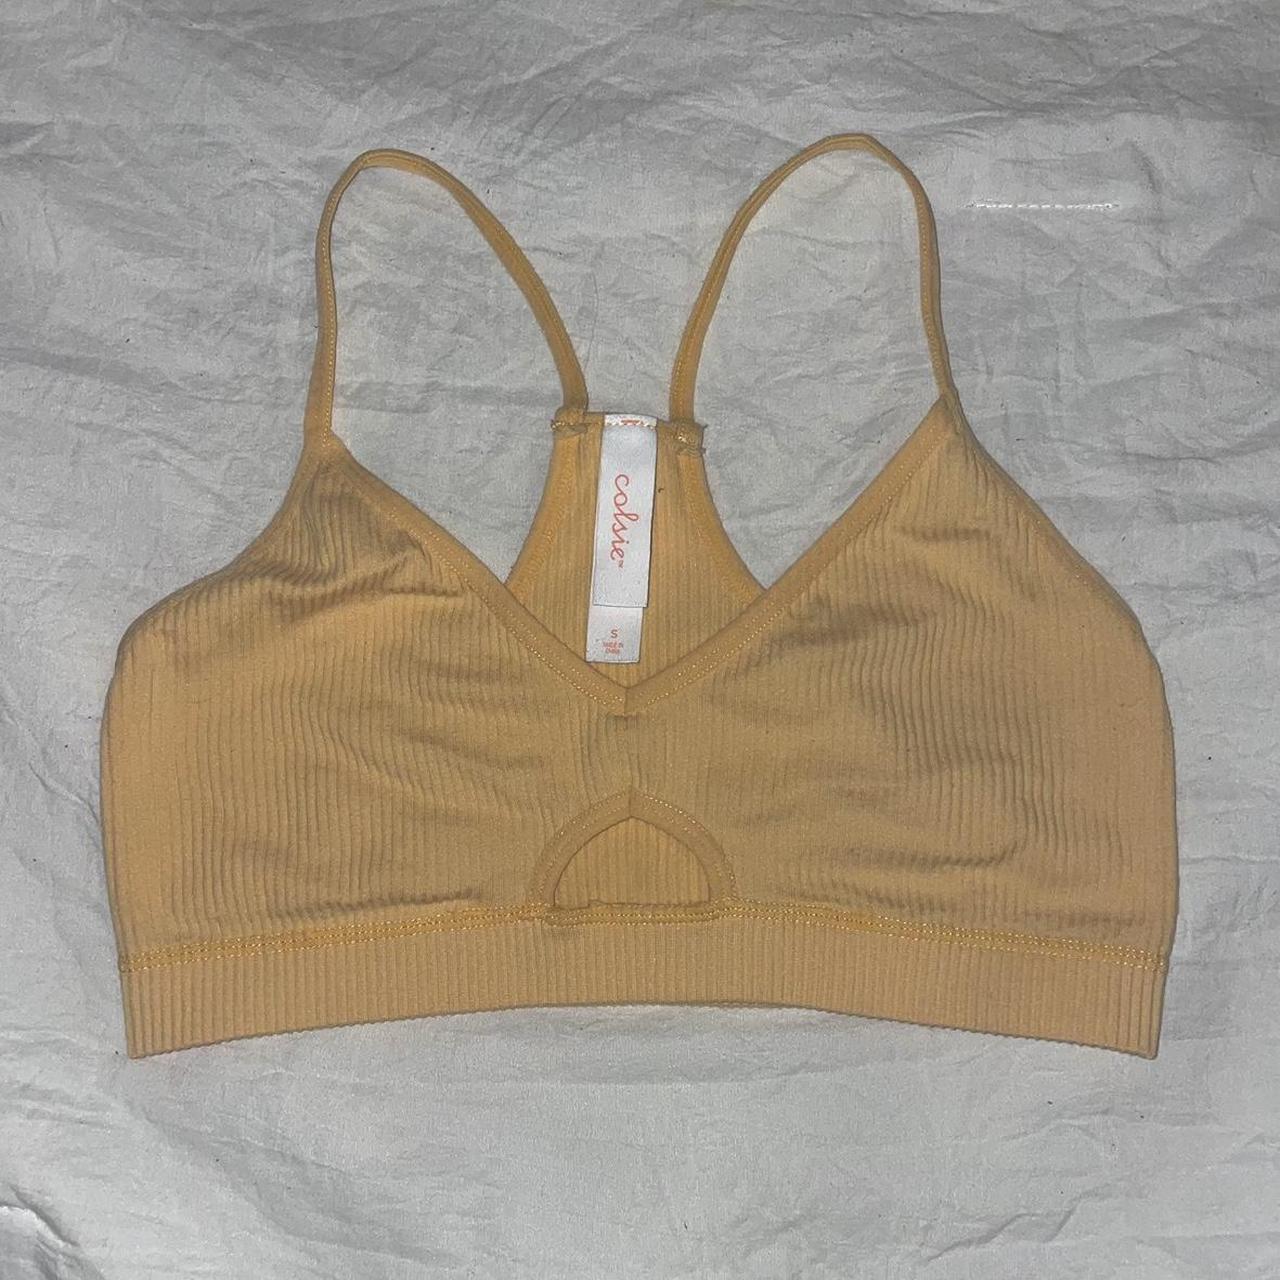 target bralette with cut out size small light orange - Depop